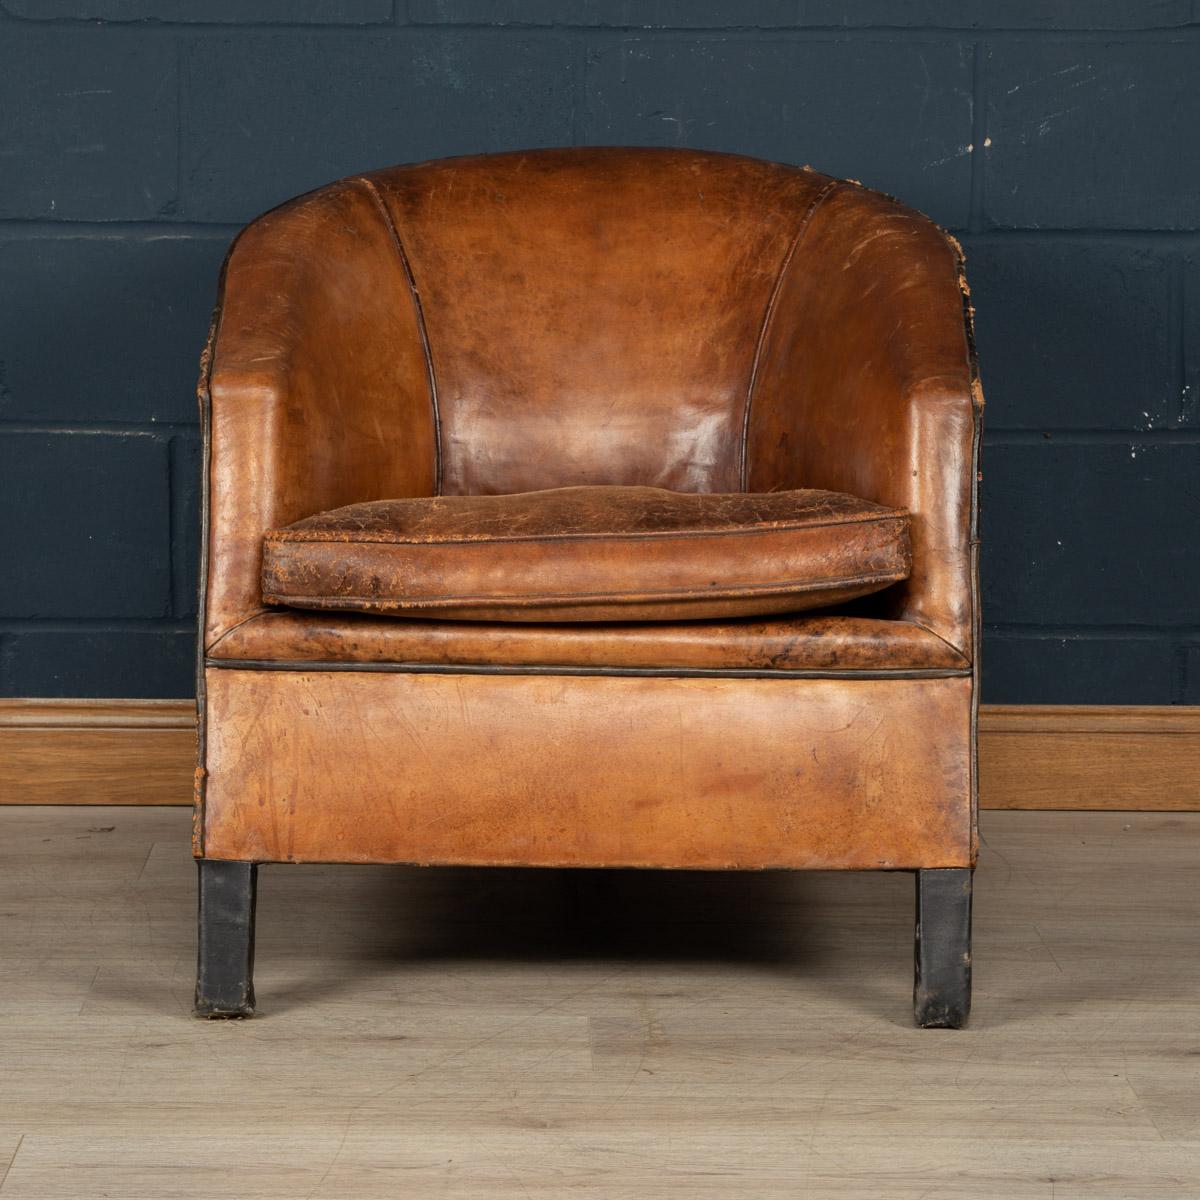 Showing superb patina and colour, this wonderful club chair was hand upholstered sheepskin leather in Holland by the finest craftsmen. With a rich tan colour leather, this particular model could well be a one-off. The chair has been constructed with